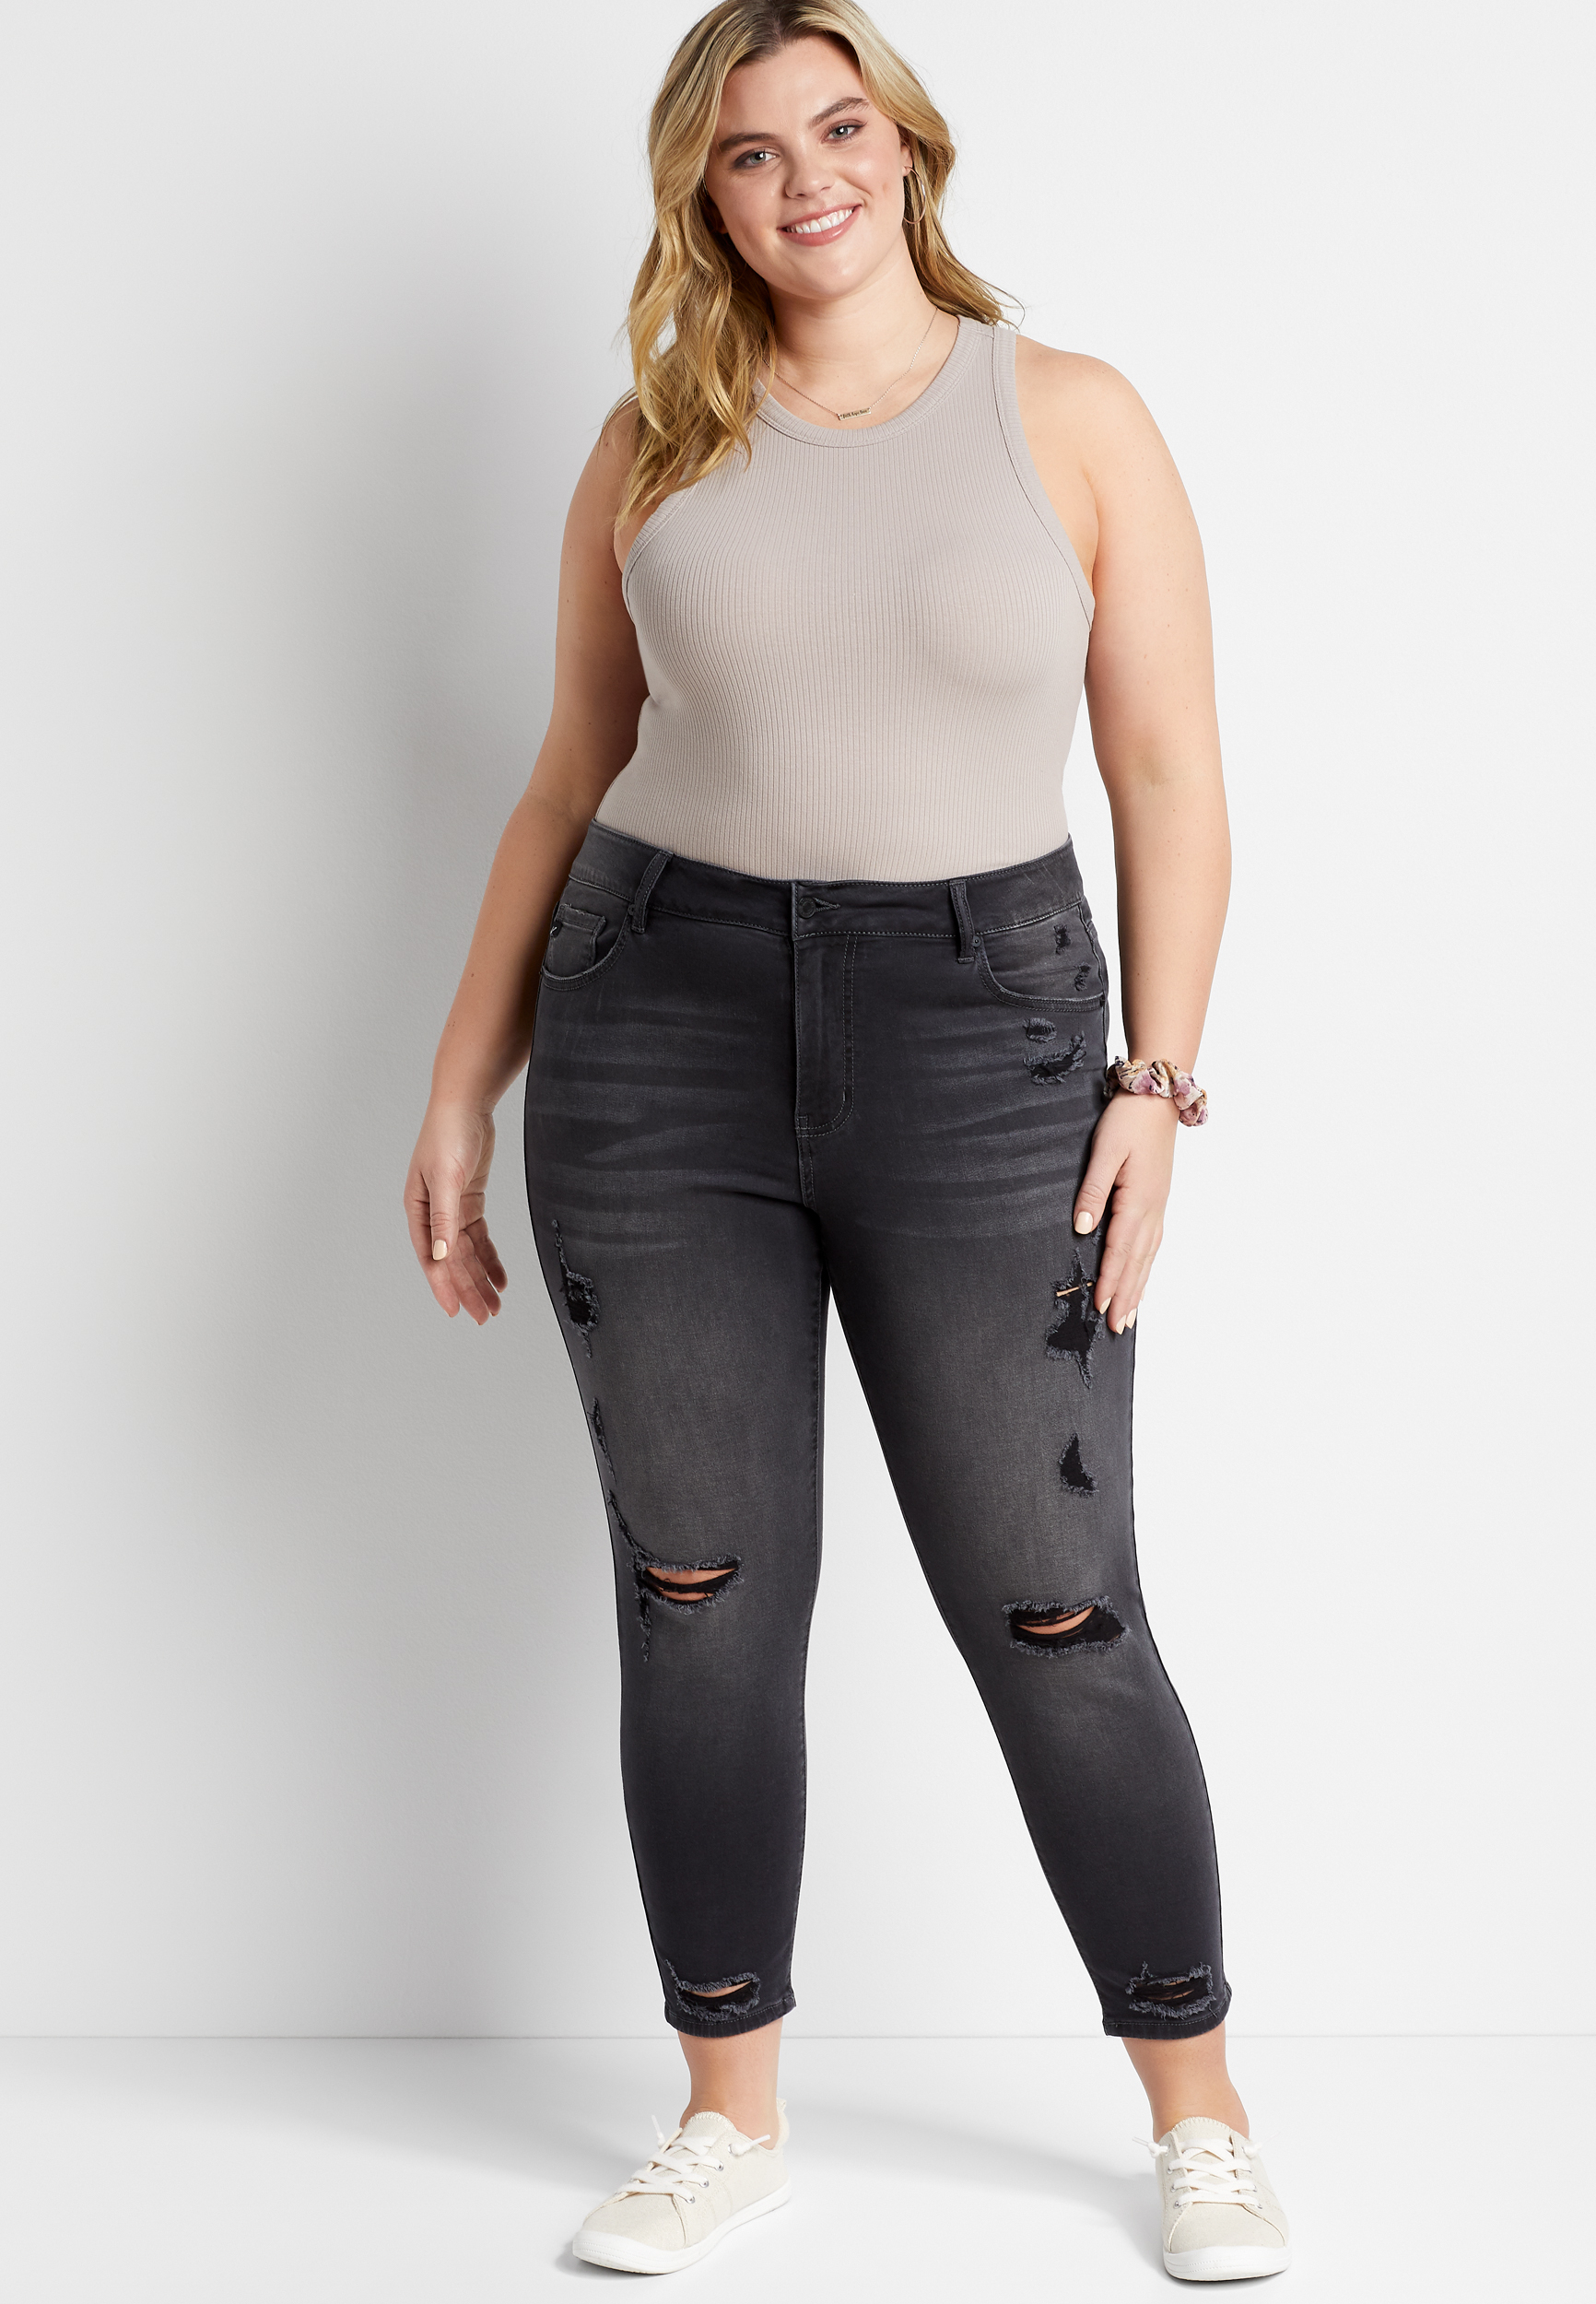 Plus Size KanCan™ High Rise Black Ripped Skinny Jean | maurices